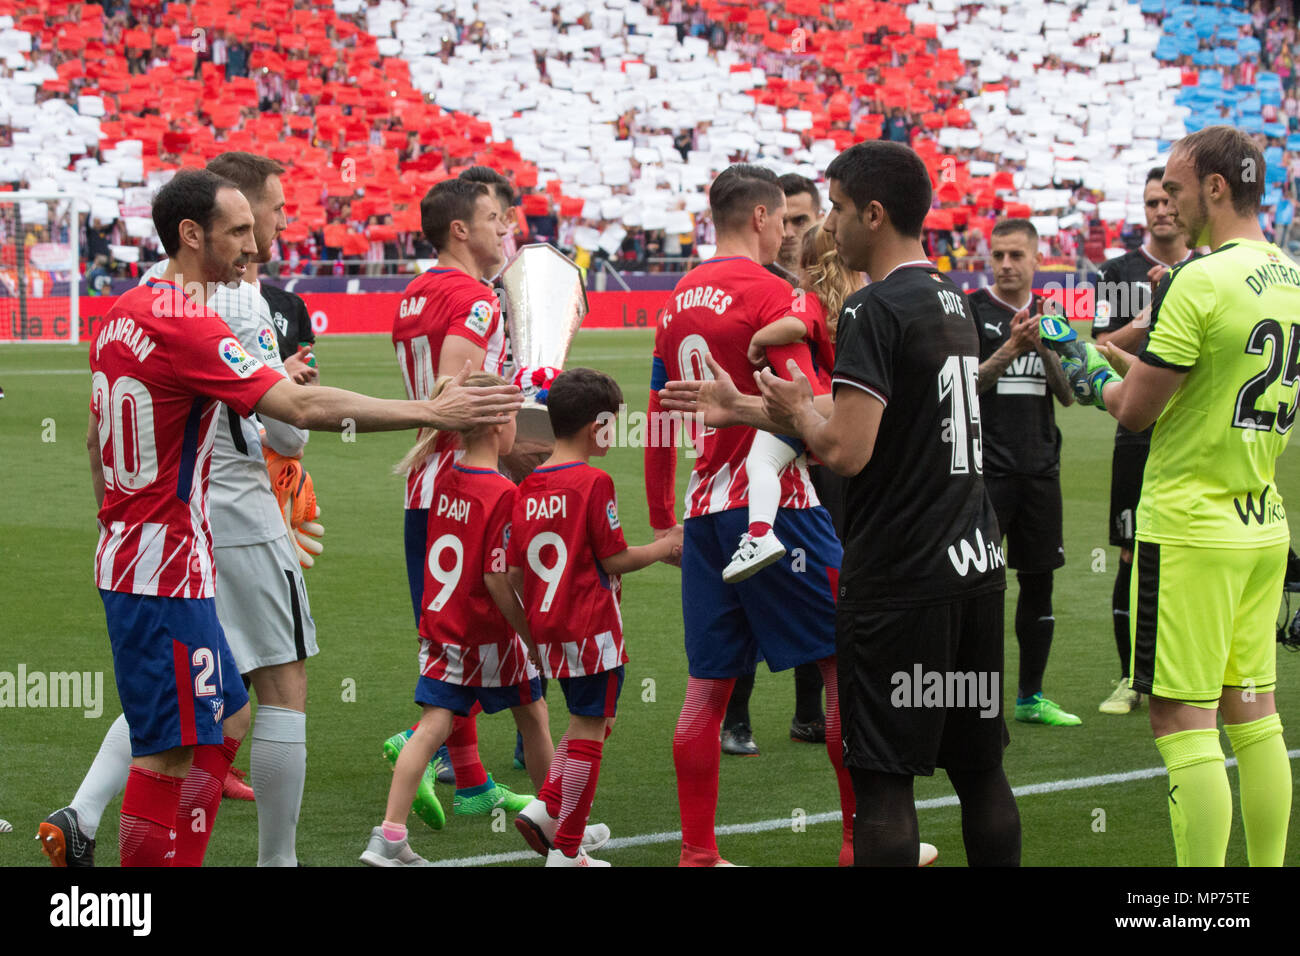 Madrid, Spain. 20th May 2018. Wanda Metropolitano stadium. Madrid. Spain. More than 68.000 people comes to see the 38th seasson of La Liga and the retire of Fernando Torres Idol of the club. The match confront Atletico de Madrid v Eibar S.D. In the image Eibar makes a passageway to Atletico de Madrid for won the Europa League. Credit: Jorge Gonzalez /Alamy Live News/Alamy Live News Stock Photo